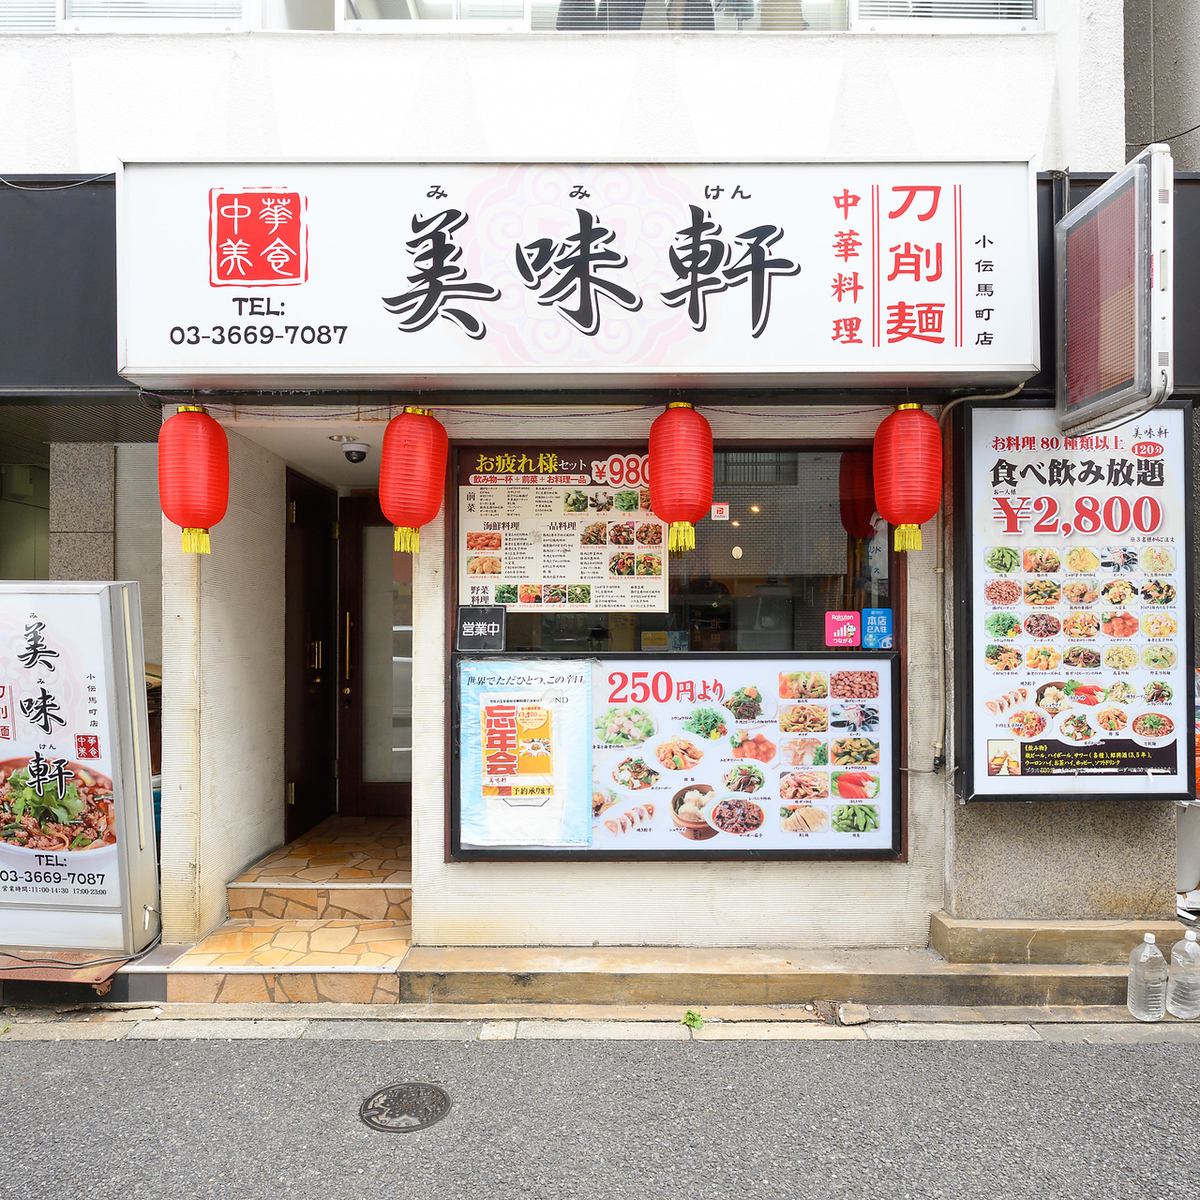 An authentic Chinese restaurant in Kodenmacho.The all-you-can-eat and drink menu is also recommended!